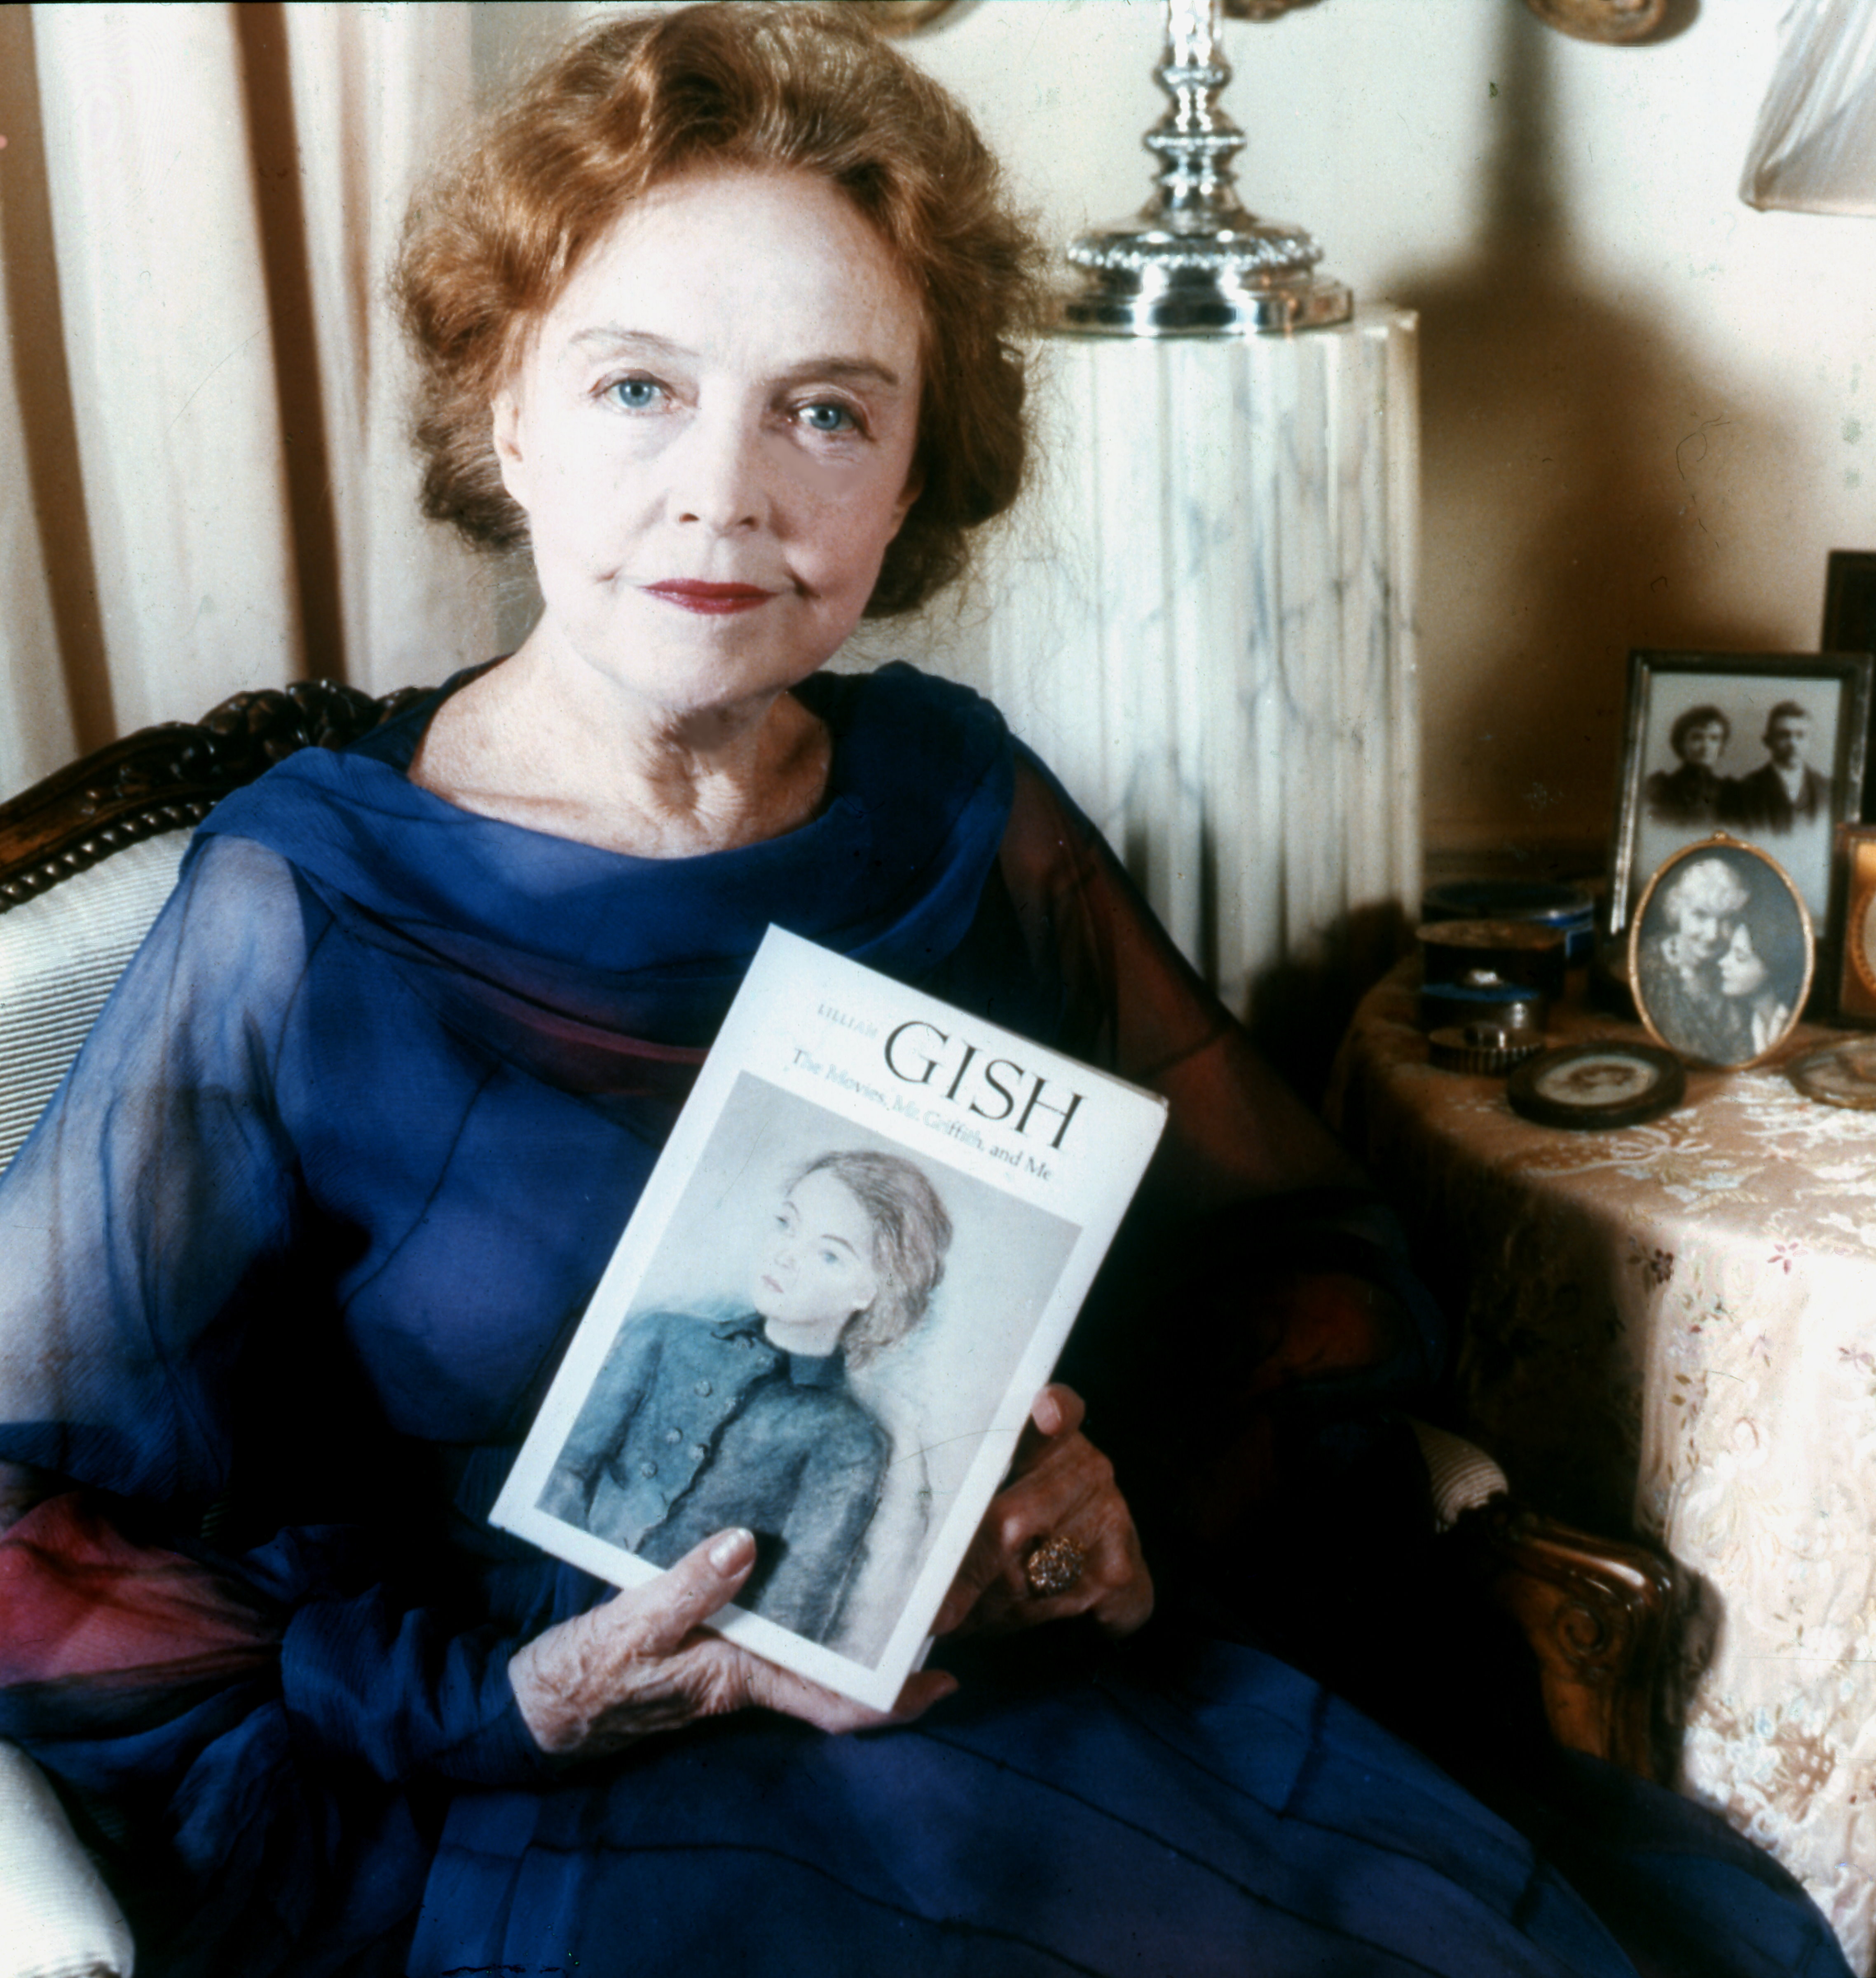 Lillian Gish holding her biography that she worked on in 1973. Gish lived to be 99, passing in 1993. She did films starting in 1912 all the way up to 1987.